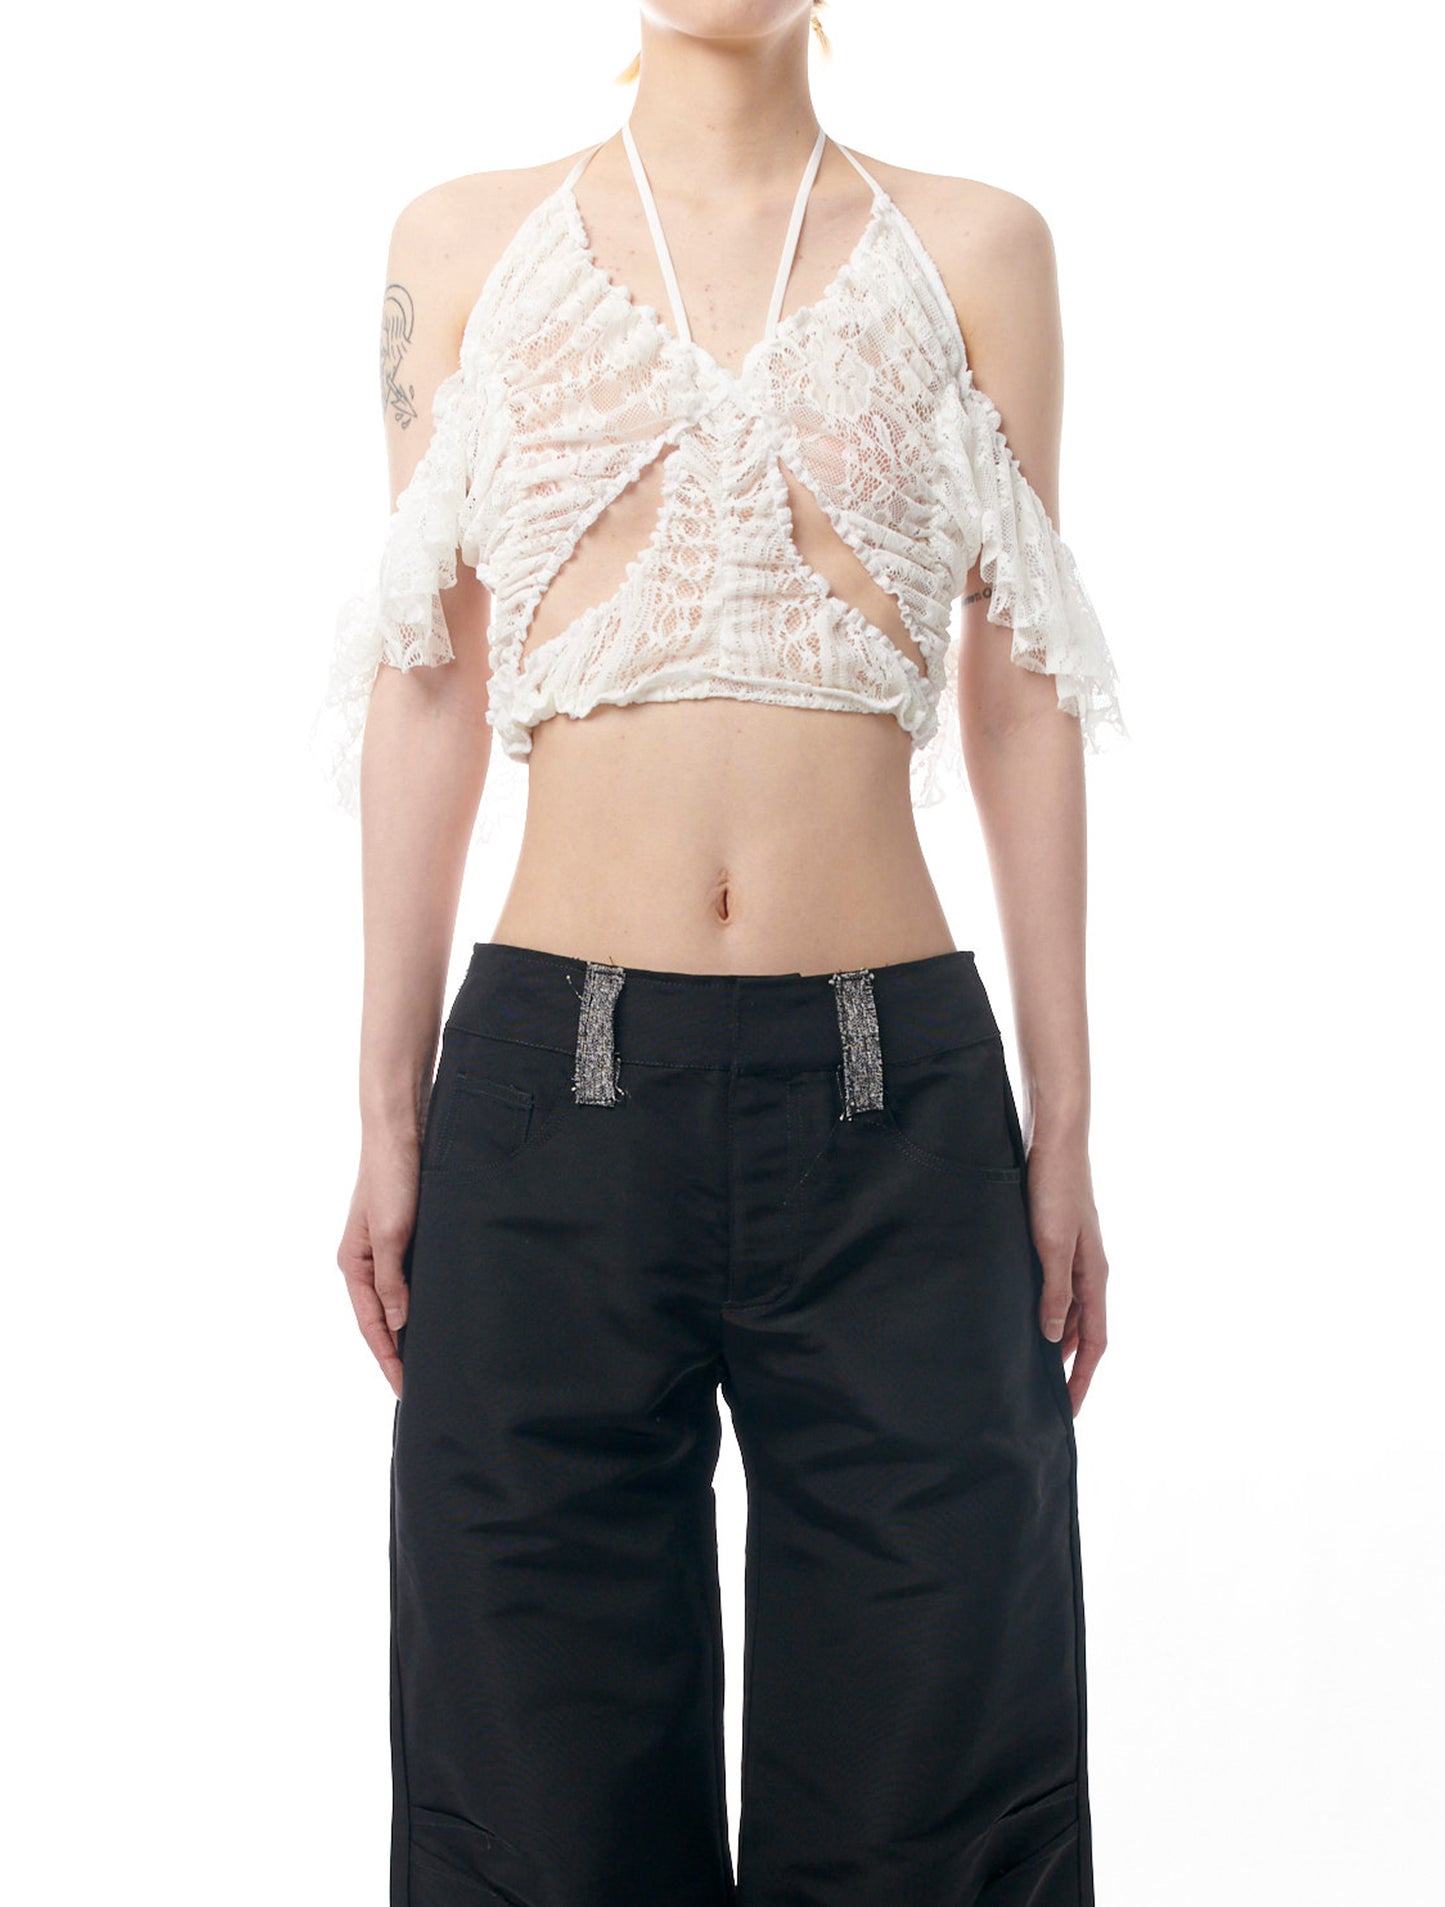 Ester Manas Butterfly Lace Top